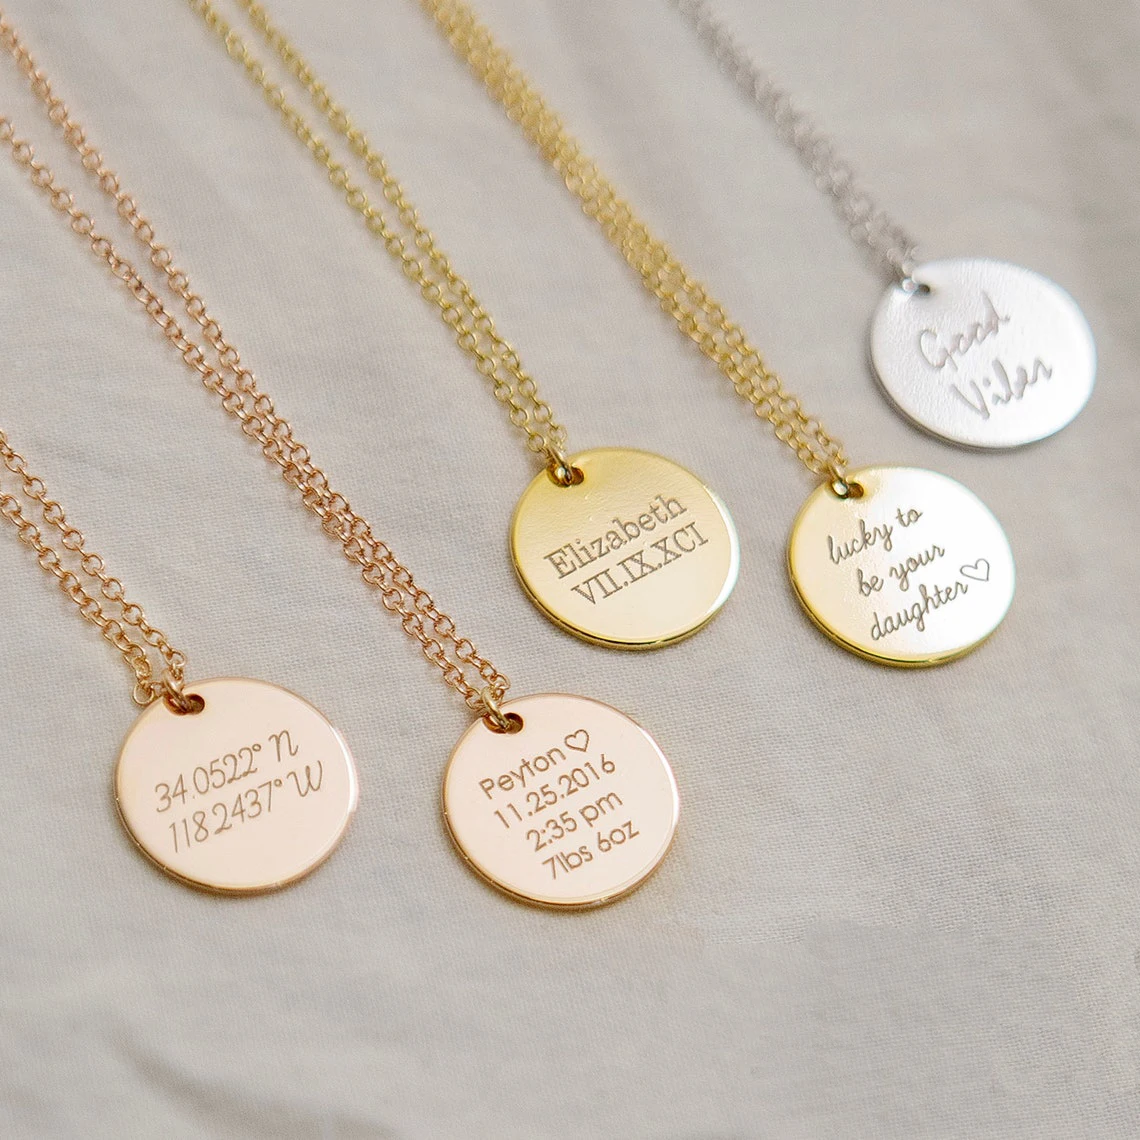 

Custom Engraved Names Date Stainless Steel Round Pendant Necklace Personalization Included Text Free with Chain Gift for Lovers